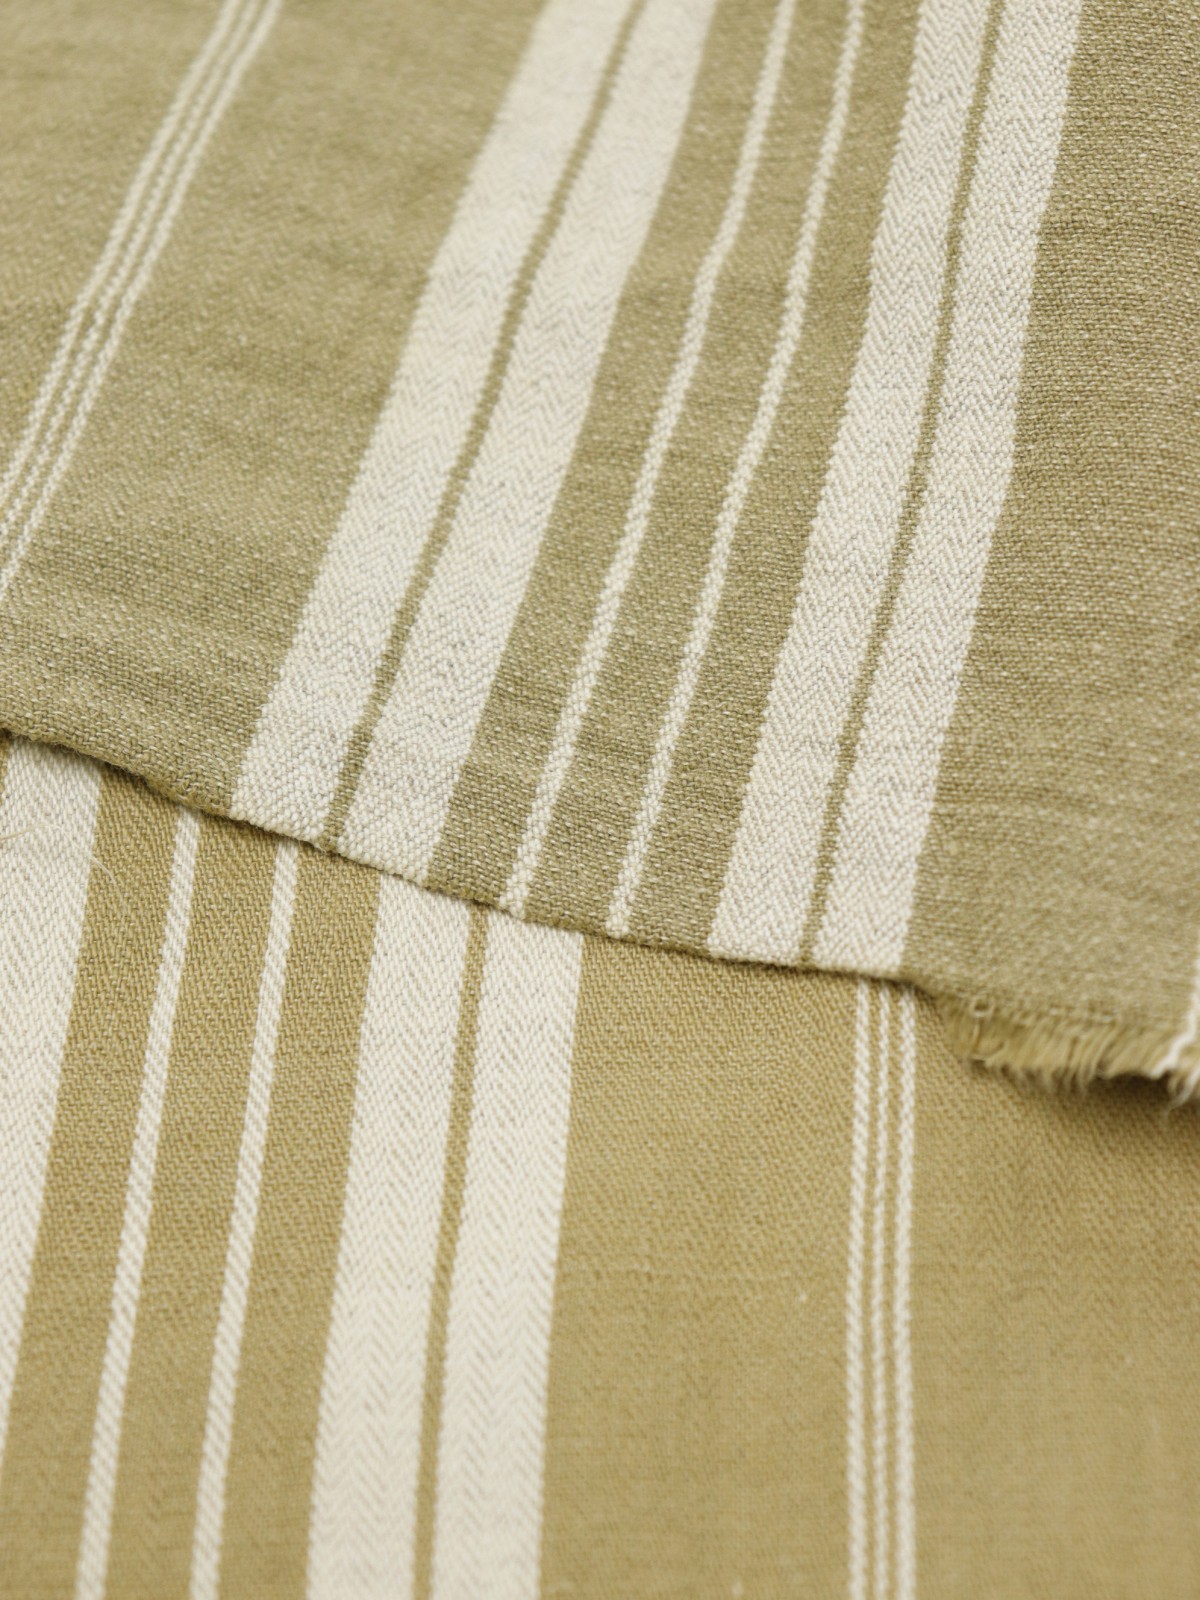 ticking, french linen, fabric